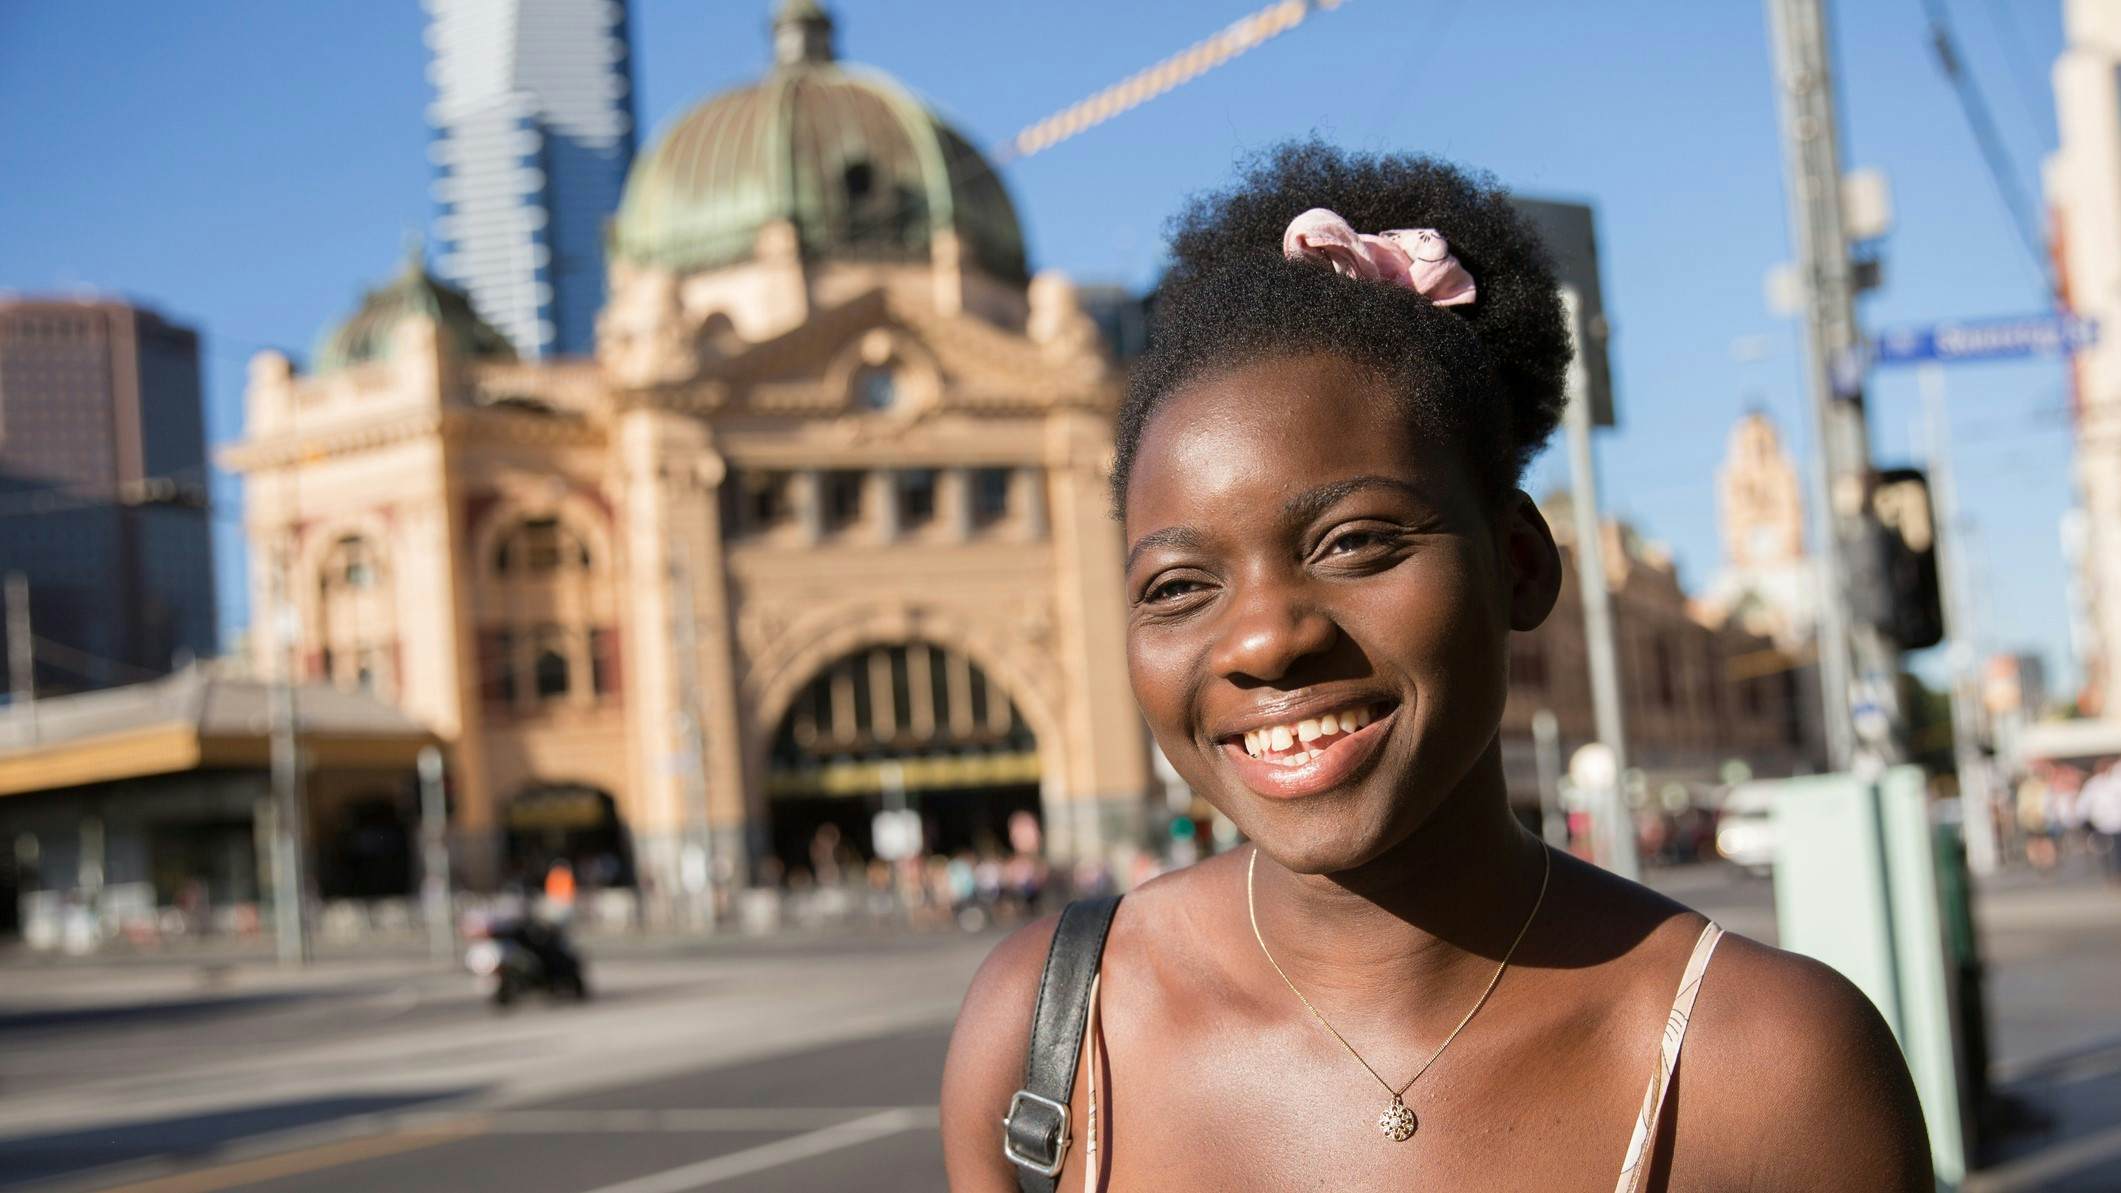 13 things to know before going to Melbourne - Lonely Planet